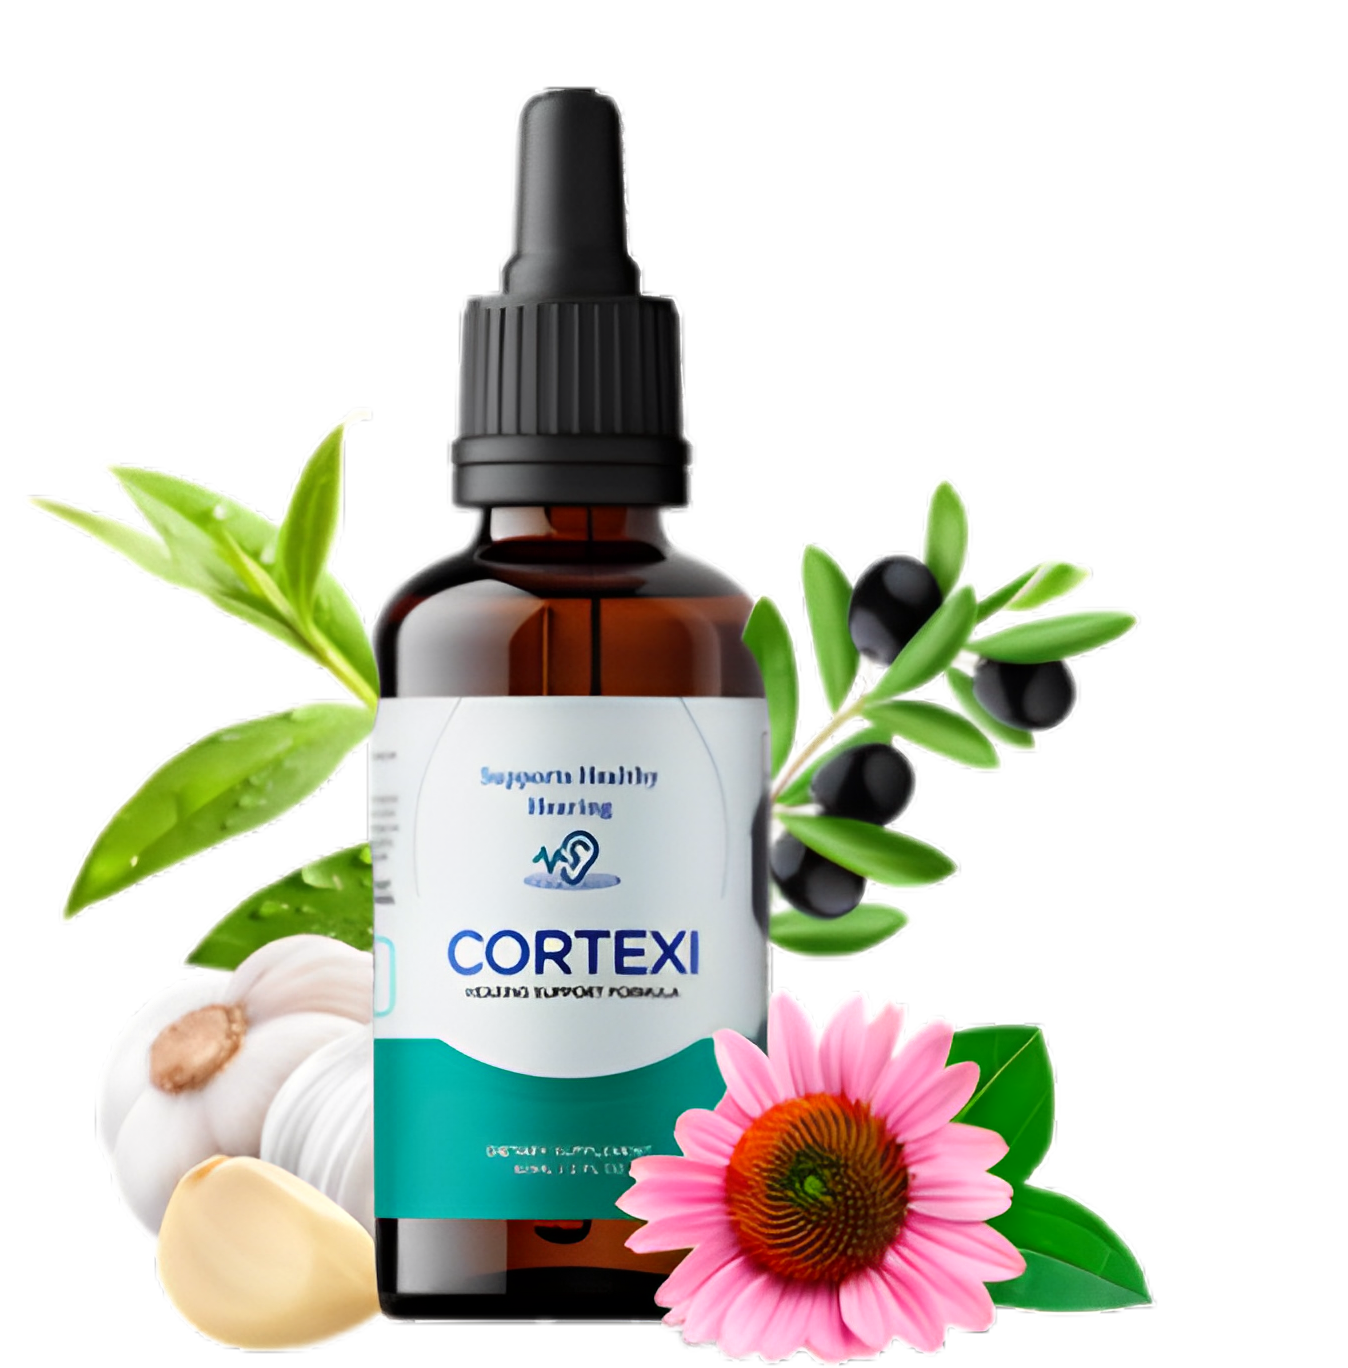 Cortexi - The Key to Healthy and Clear Hearing